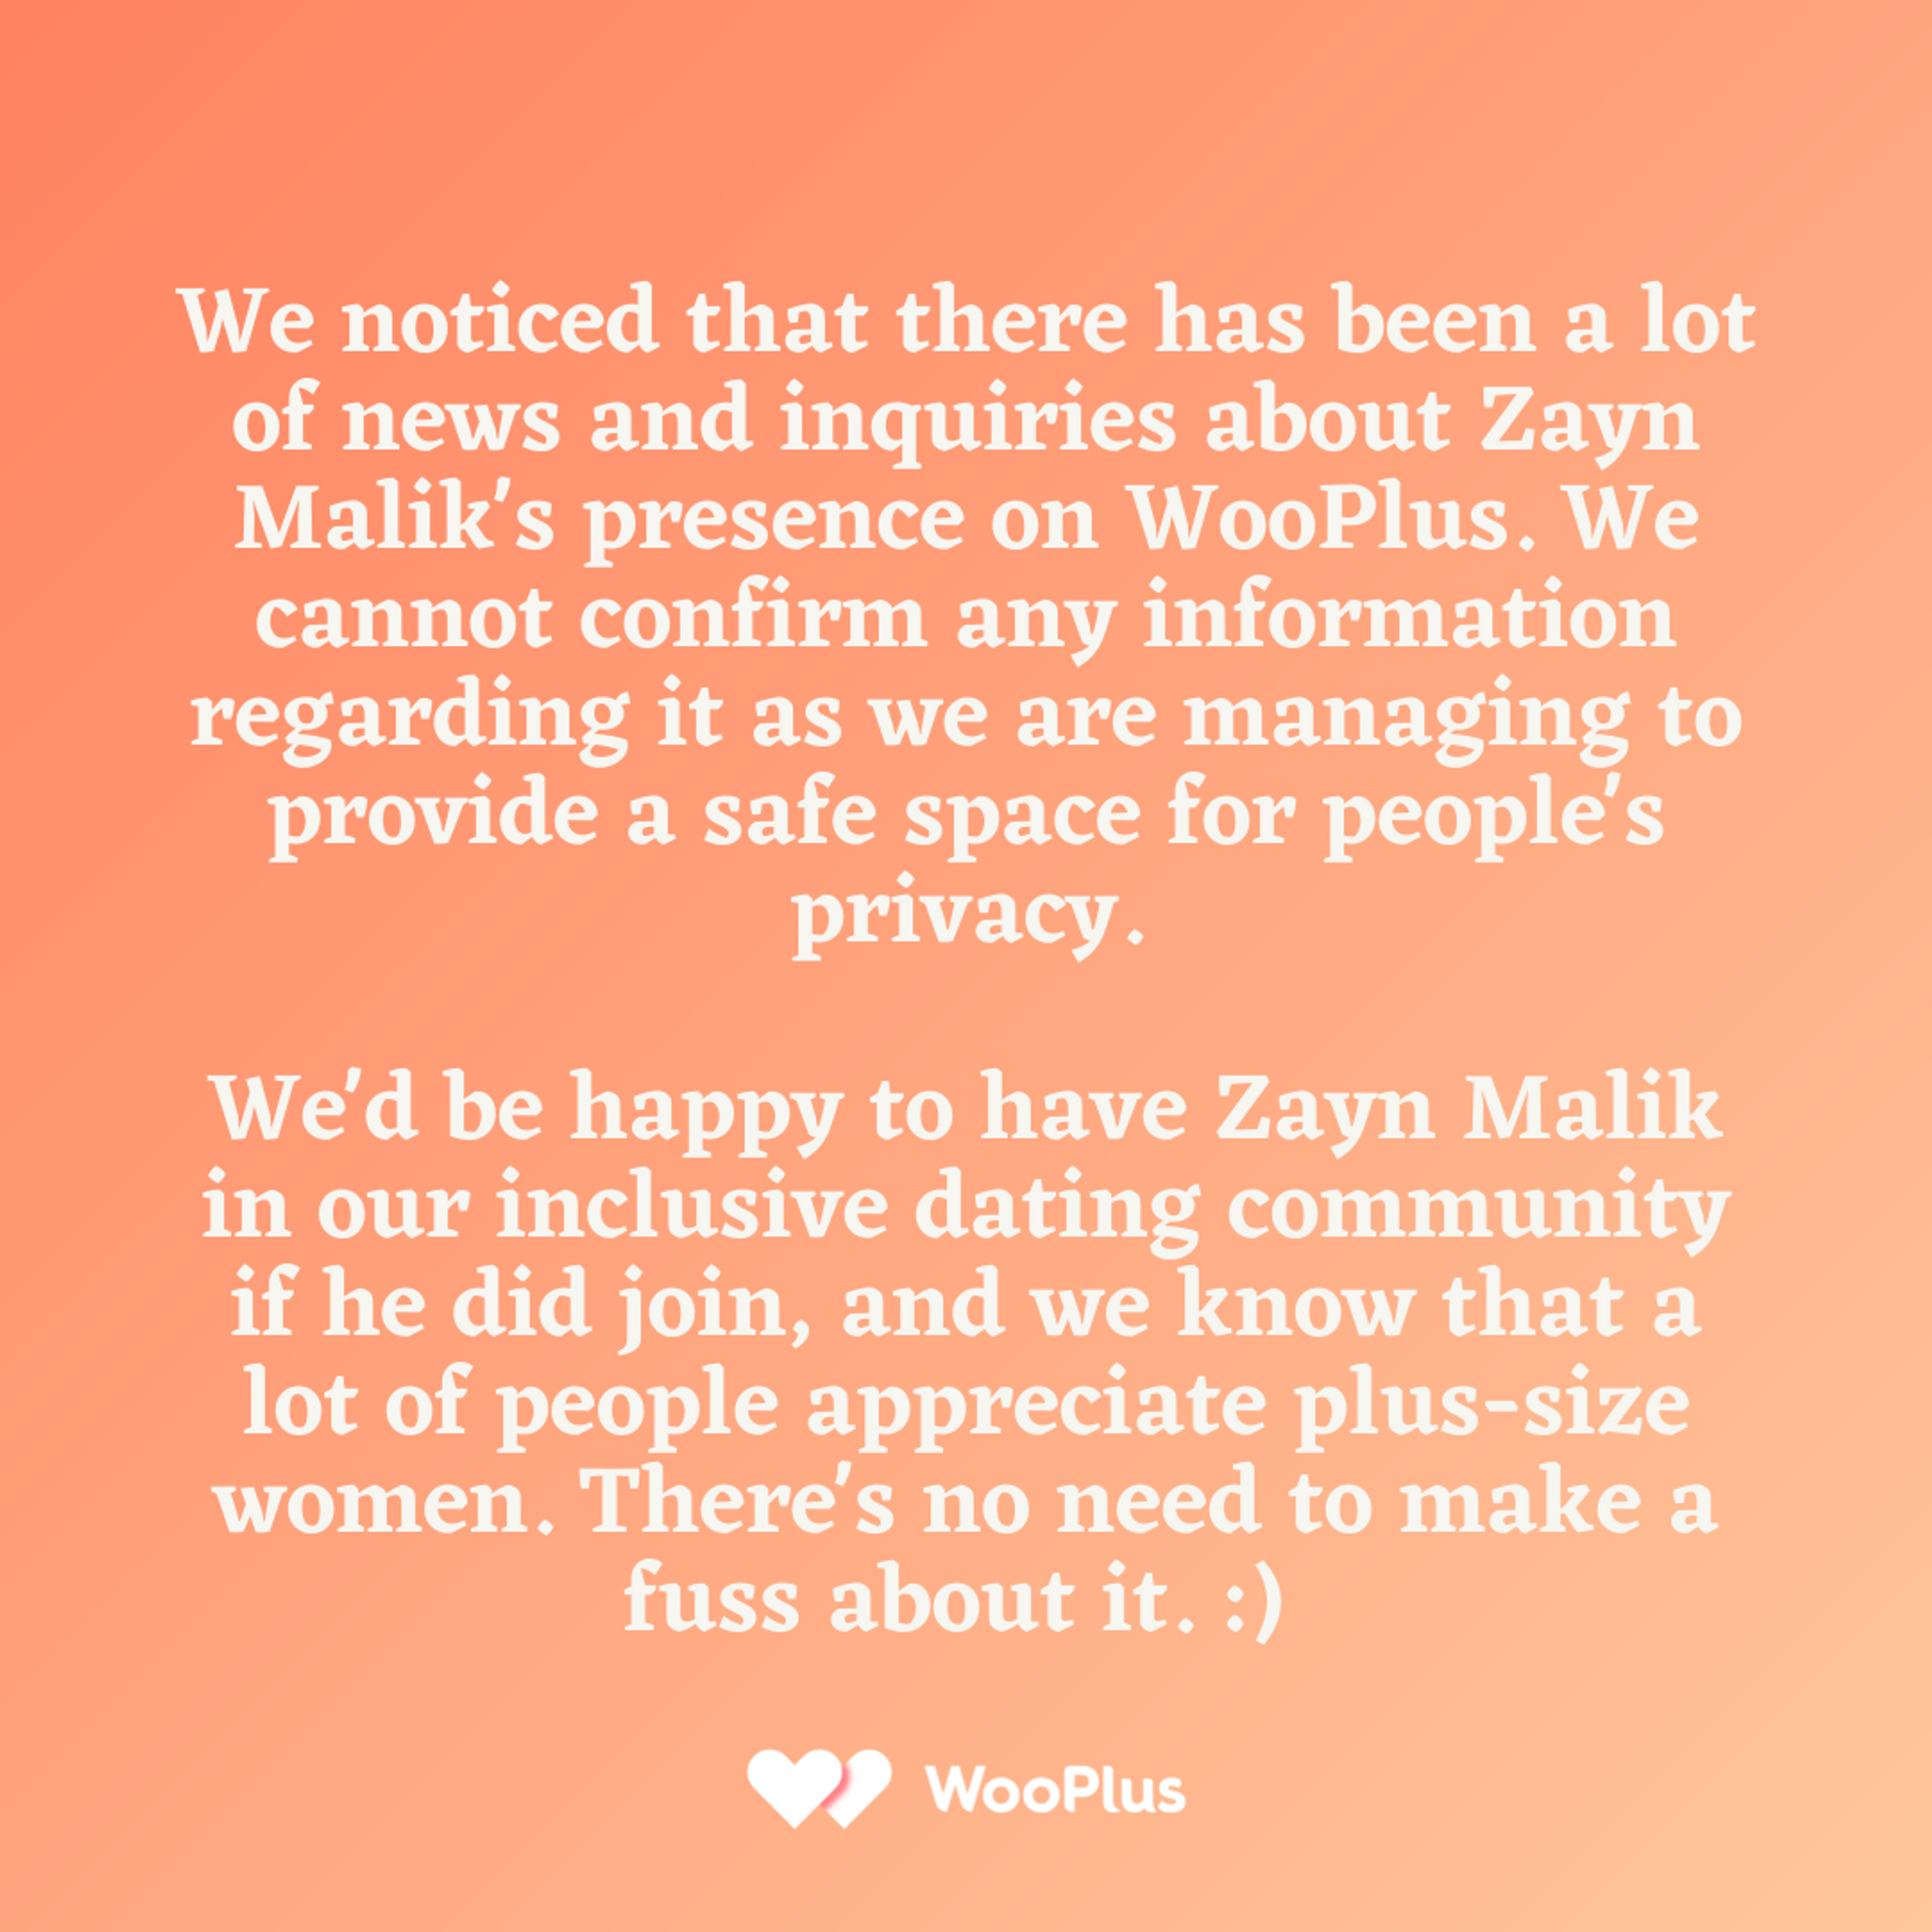 WooPlus Response to Recent News & Inquires